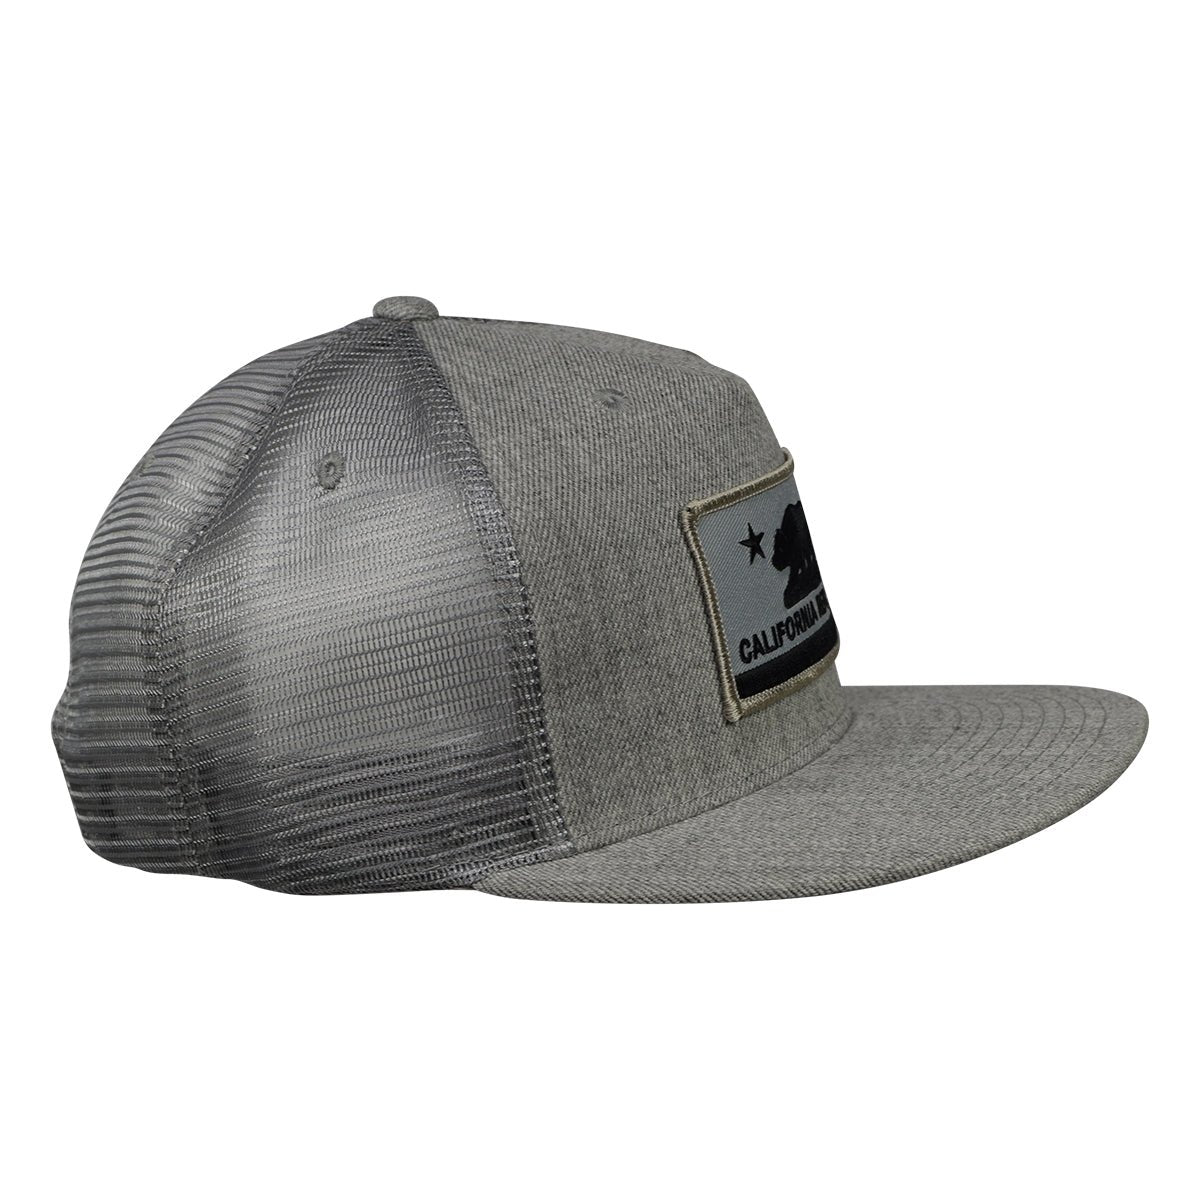 California Republic Flag Trucker Hat by LET'S BE IRIE - Heather Gray - Let's Be Irie™